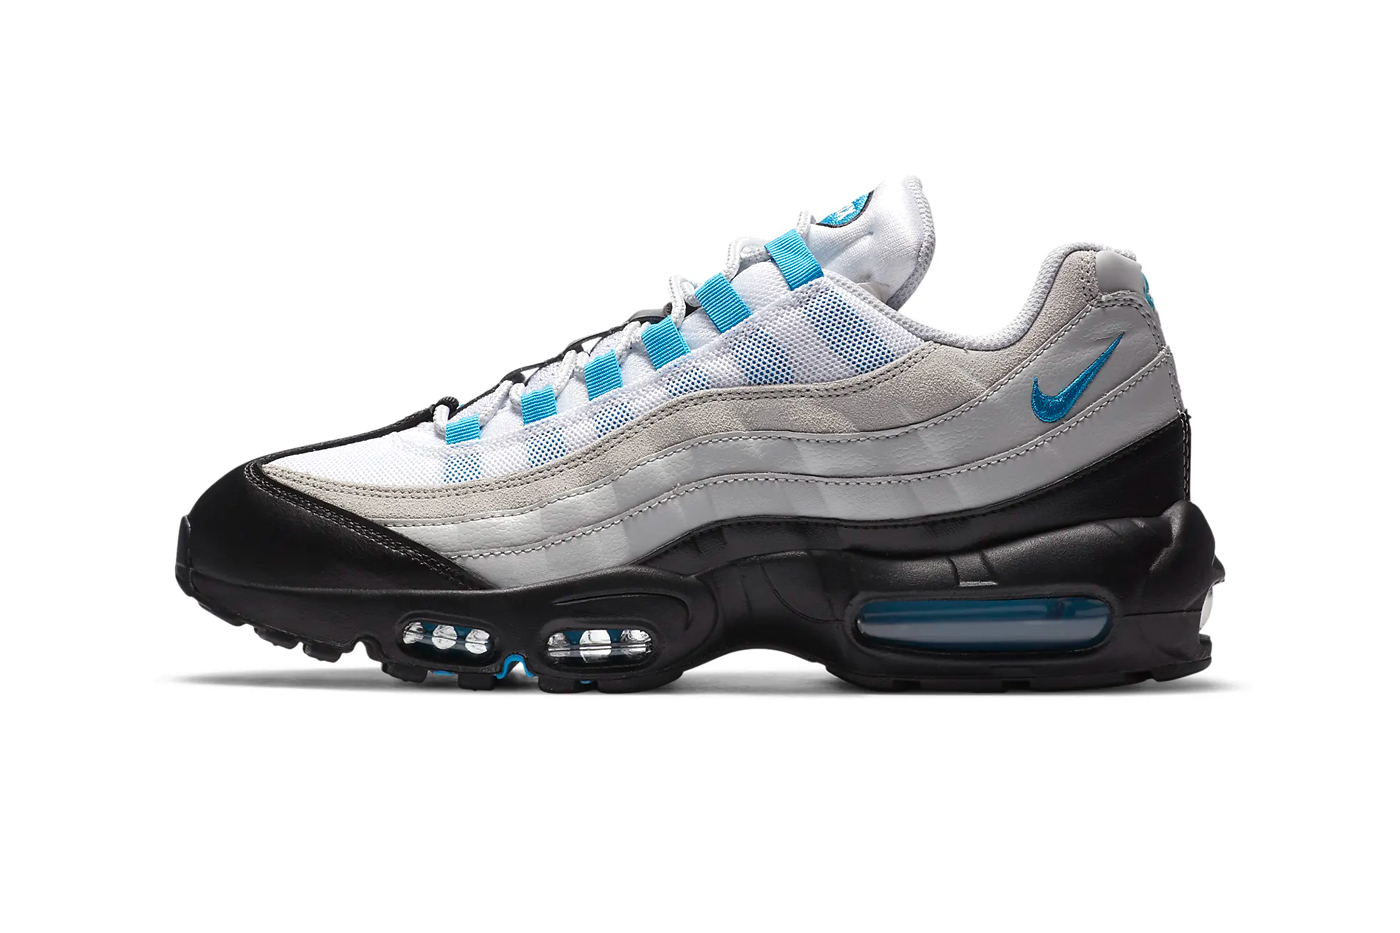 Nike Air Max 95 "Laser Blue" Gray Fog White Black CZ8684 001 menswear streetwear spring summer 2020 collection ss20 footwear shoes sneakers kicks trainers runners